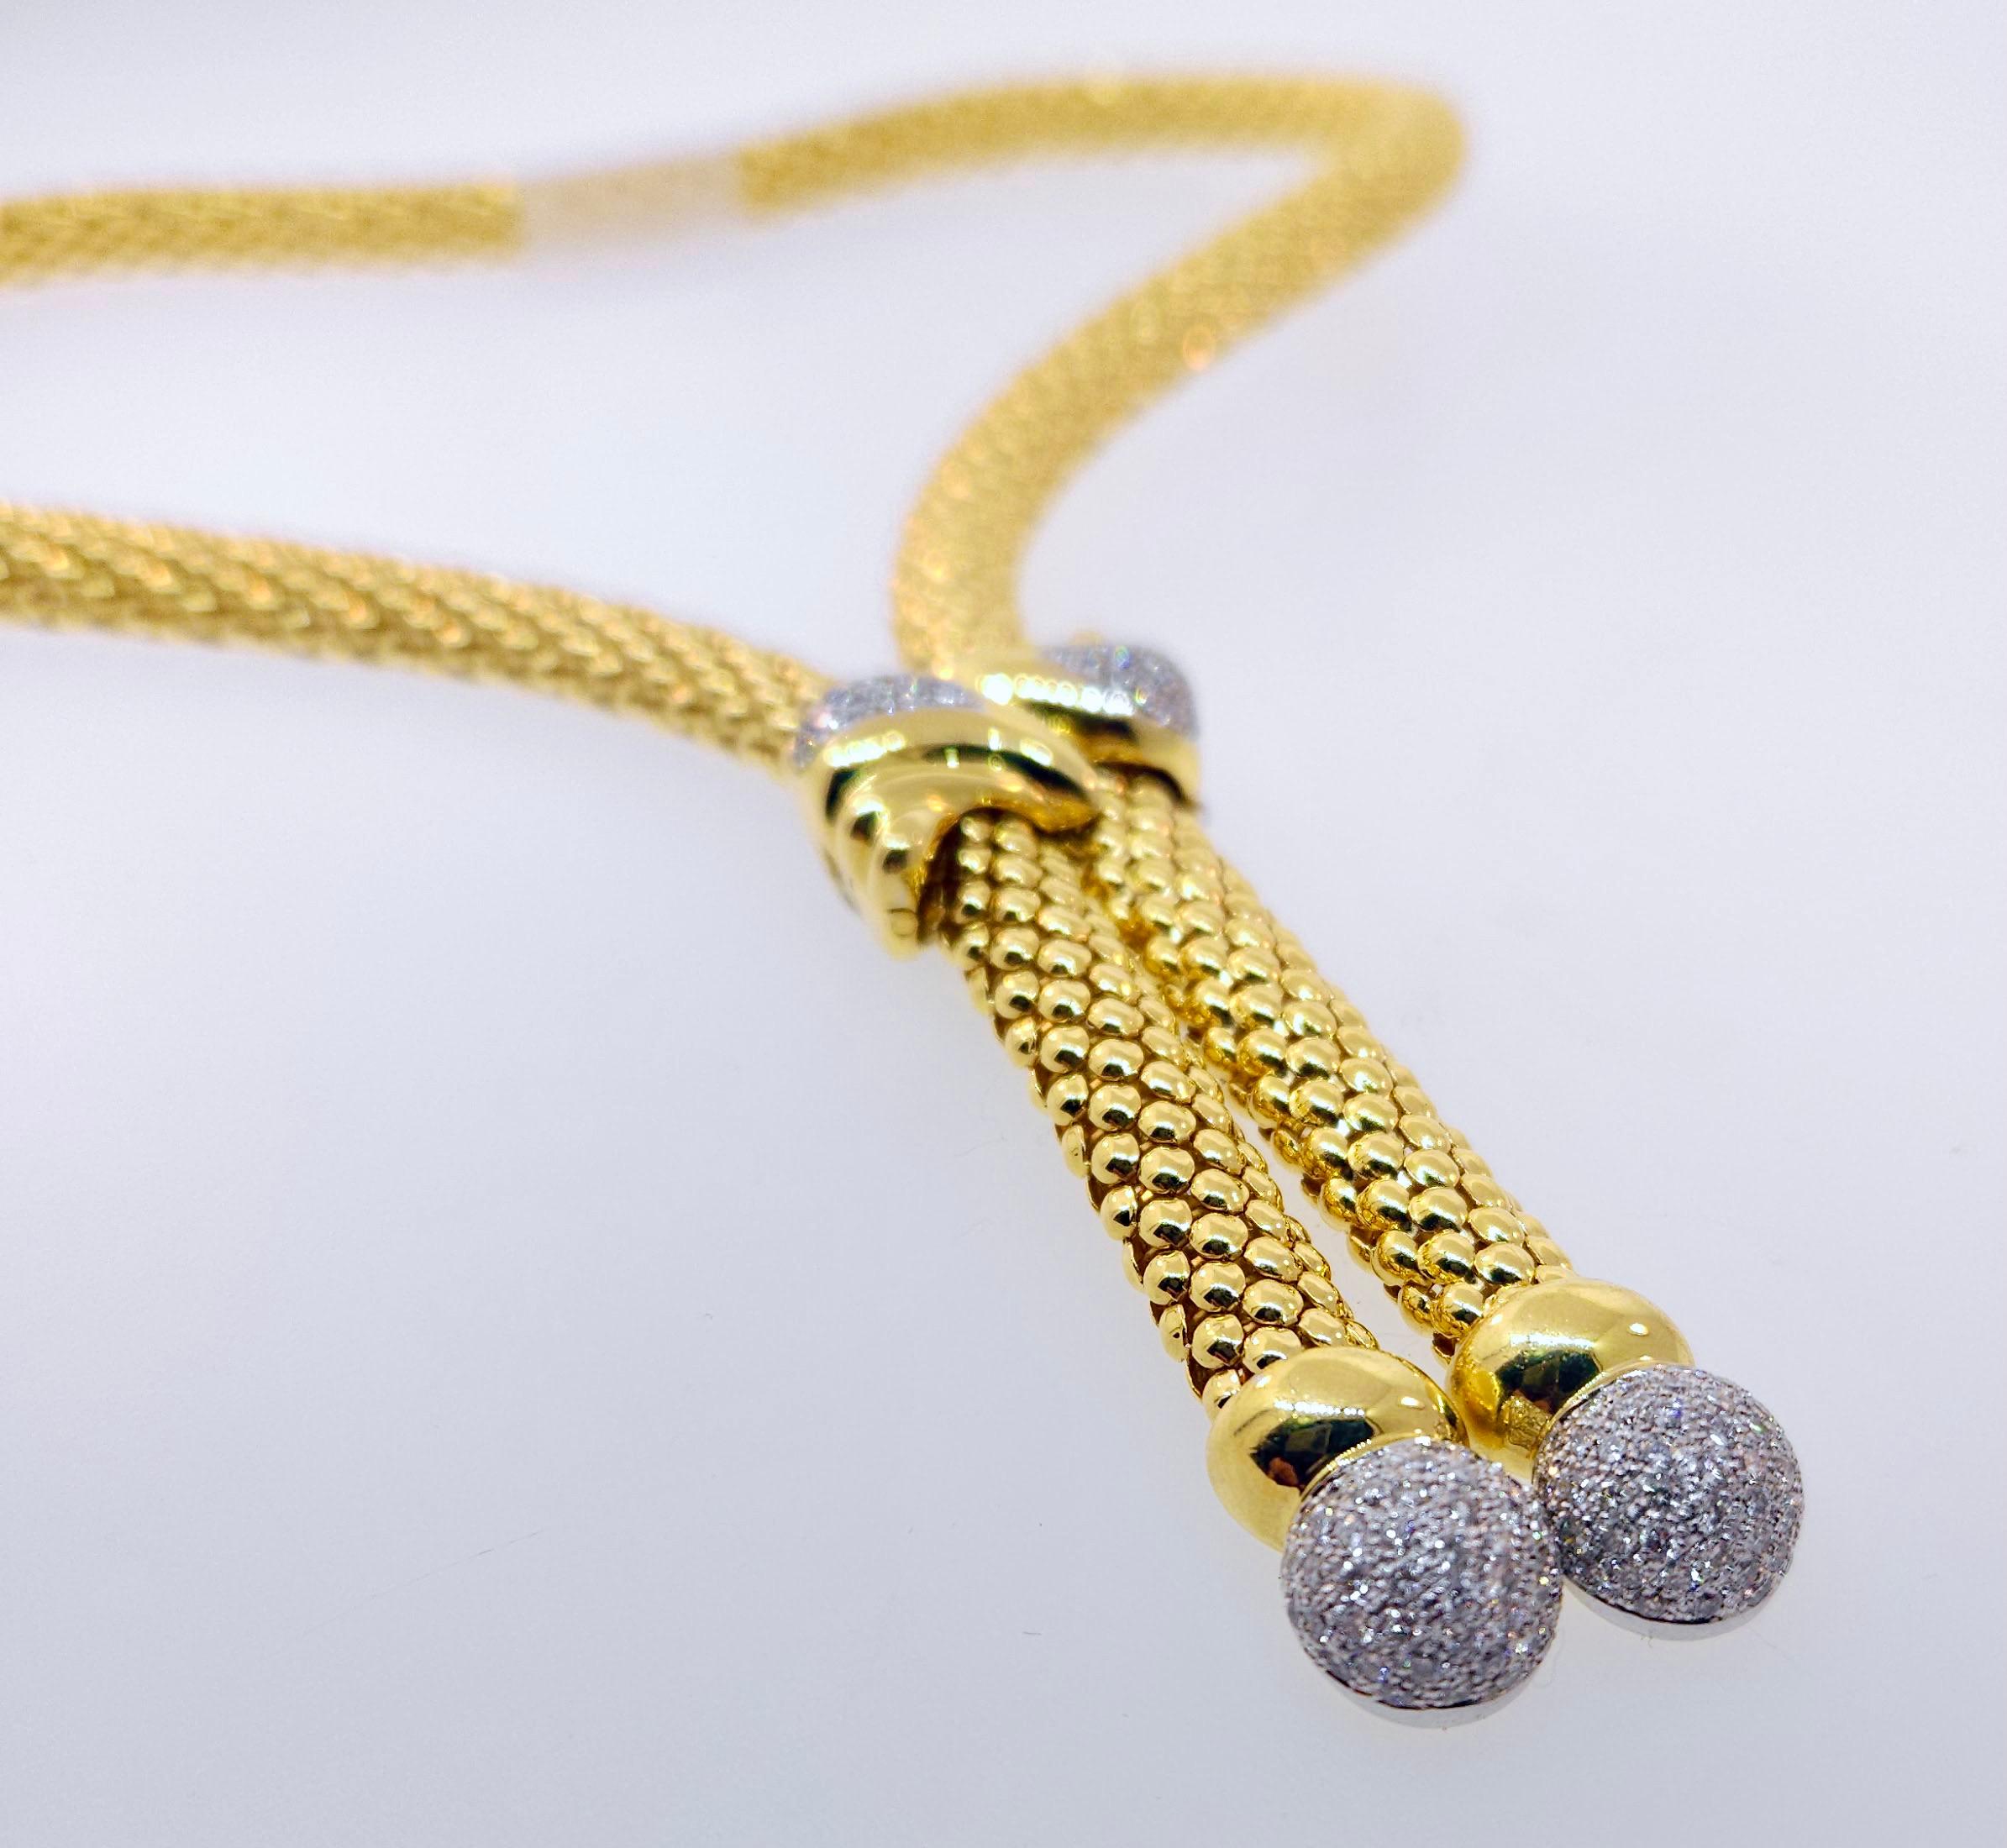 Thank you for viewing this beautiful 18k gold diamond lariat necklace.  The necklace weights 71.5 grams.  It contains diamonds weighting approximately 2.50 carats.  The diamonds on average are H color, SI clarity.  The length can be adjusted up to a